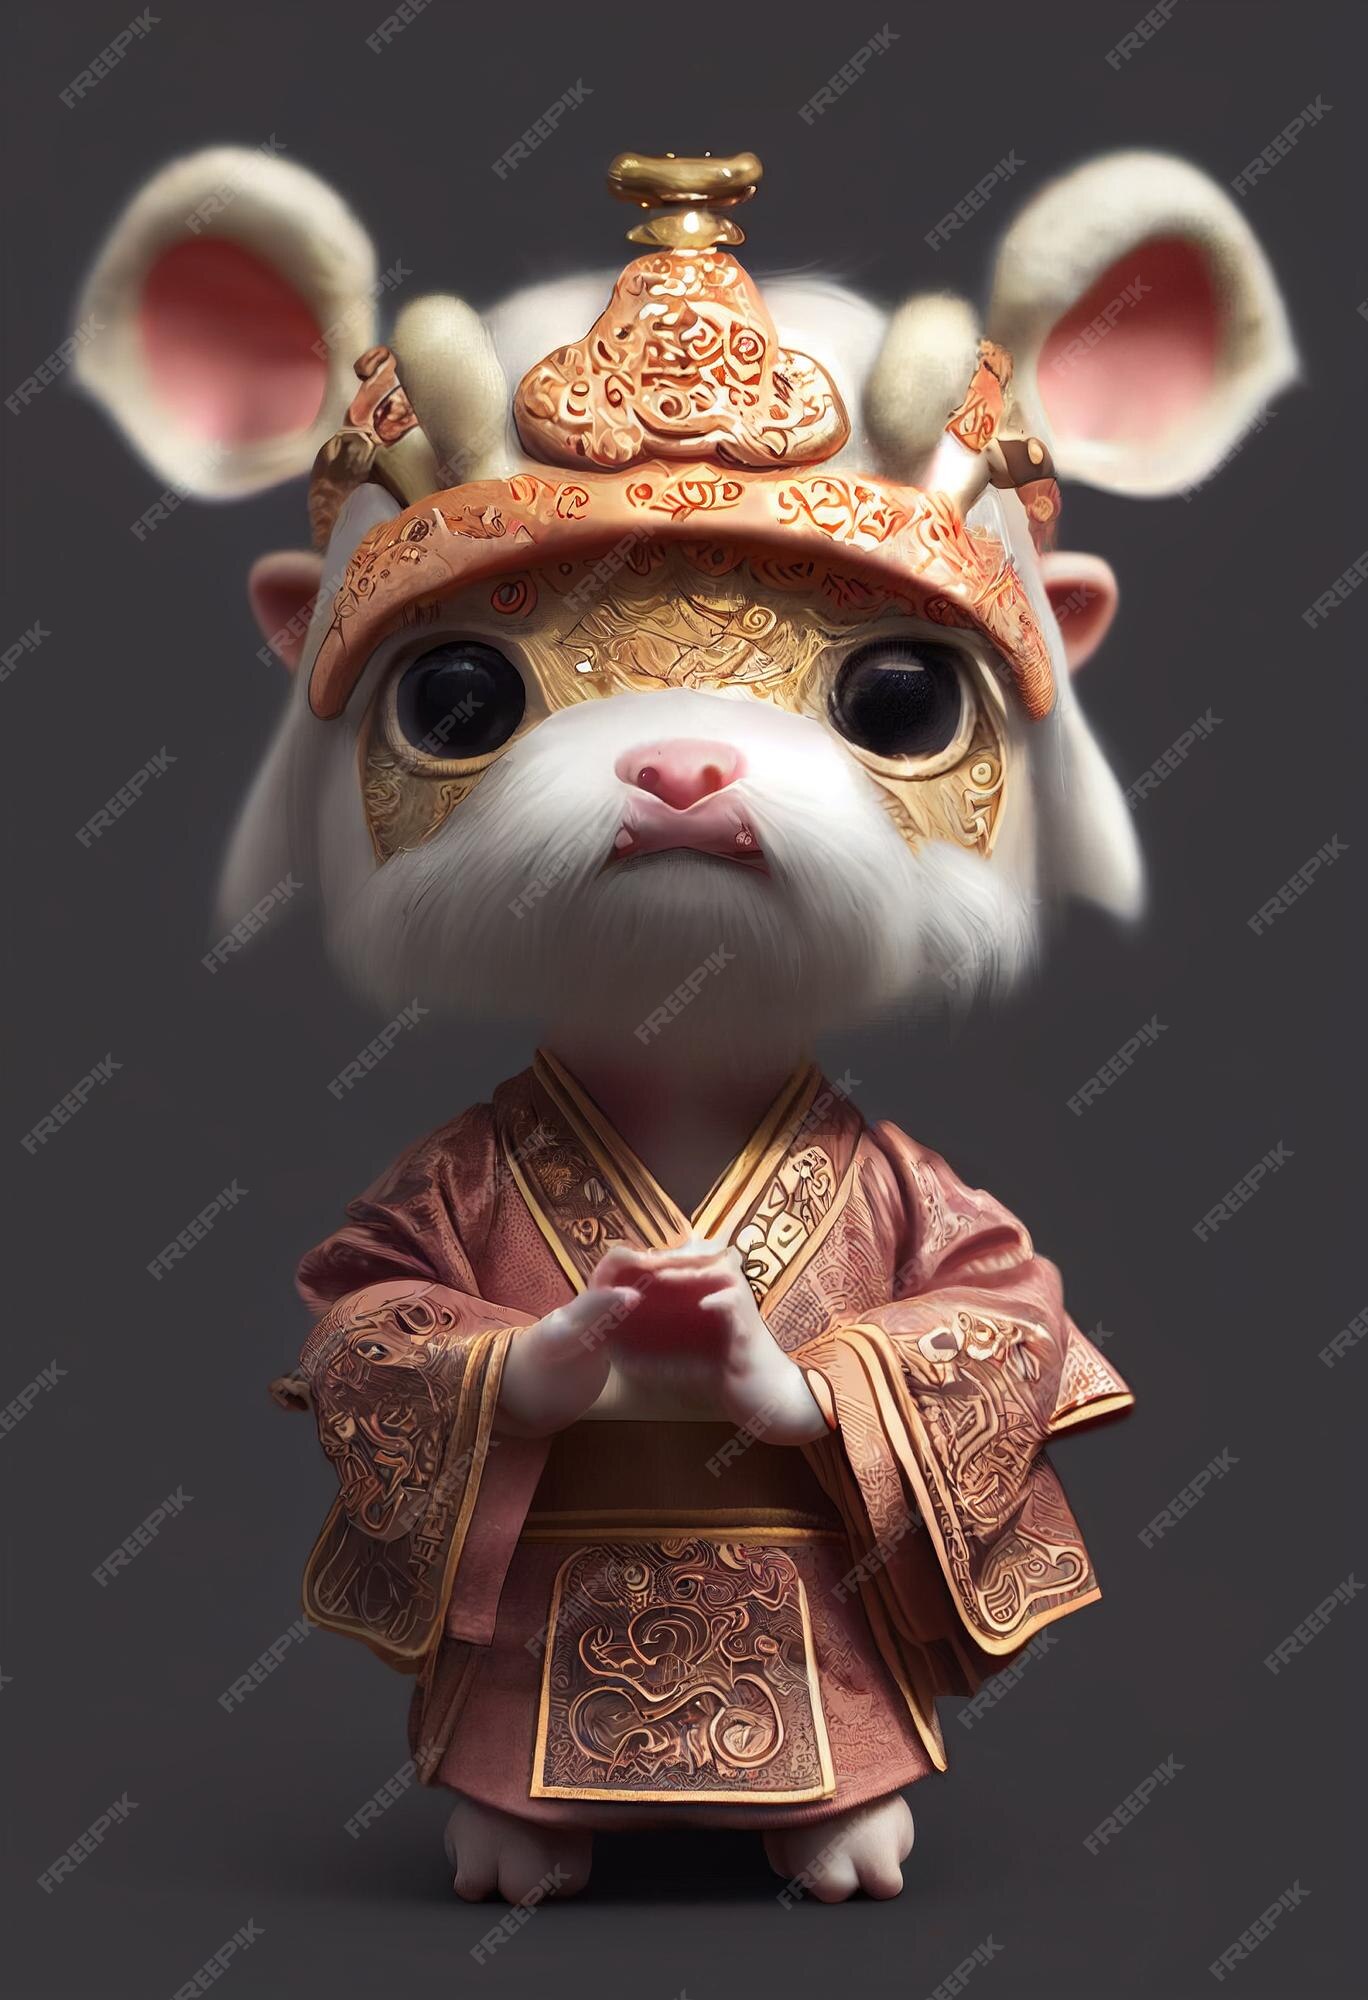 Premium Photo | Chinese, chinese zodiac signs, chinese han dynasty clothes,  chinese kung fu poses, animals, anthropo